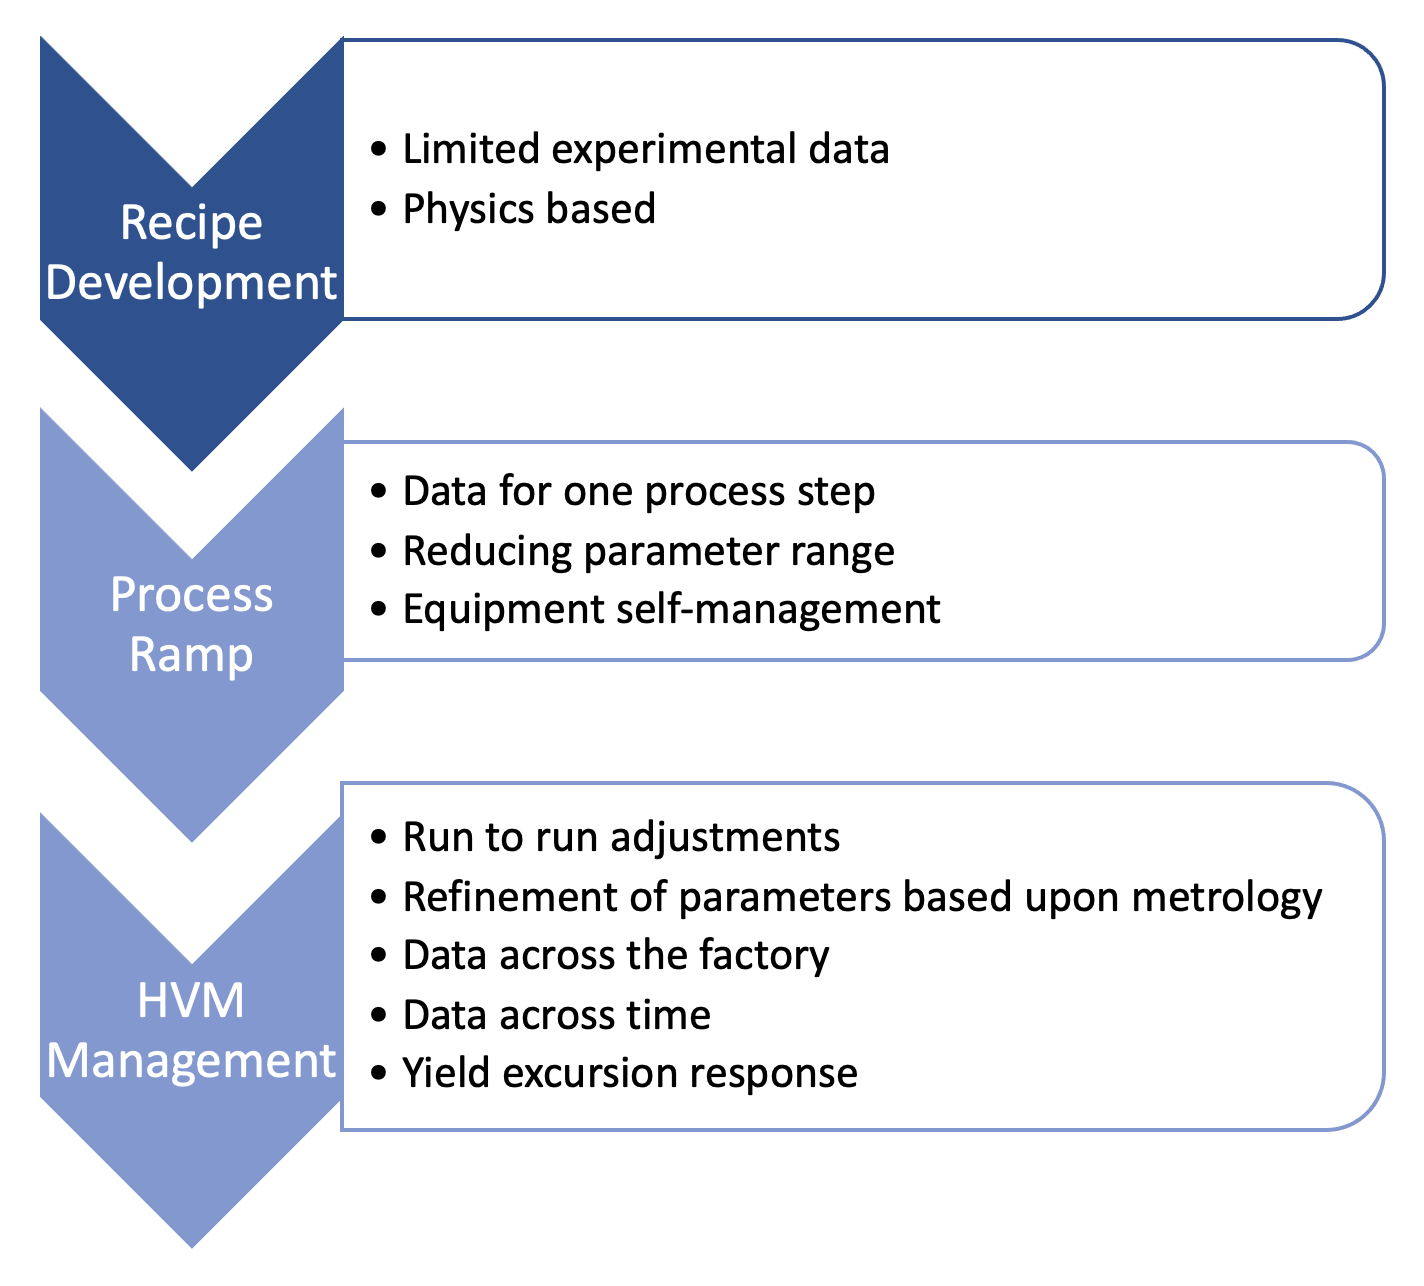 Fig. 1: ML applications are used to speed recipe development, process ramping, and manufacturing WIP control. Source: A. Meixner/Semiconductor Engineering